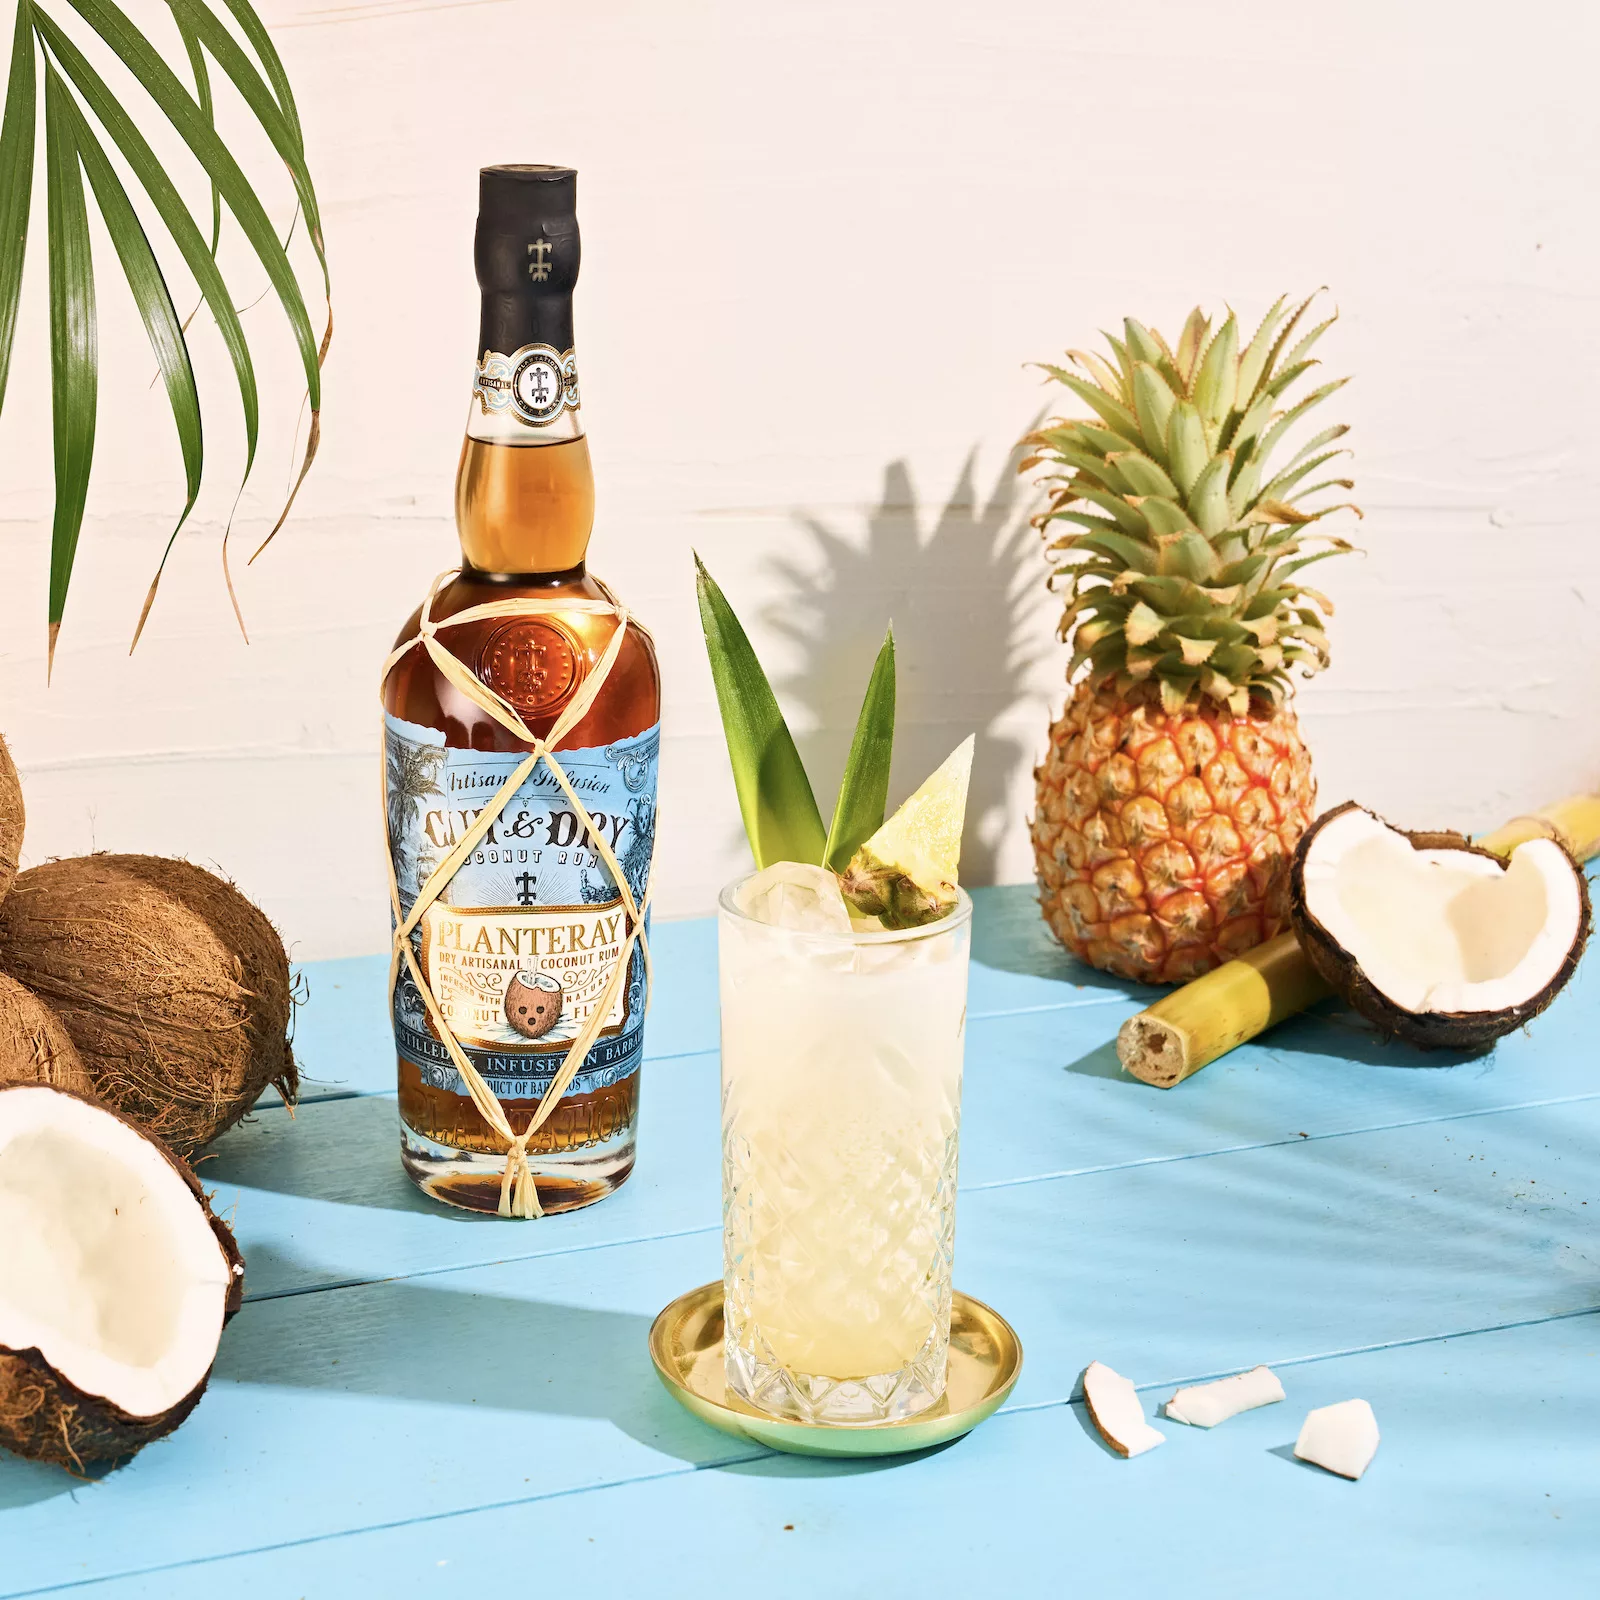 Rum Planteray Cut and Dry Coconut